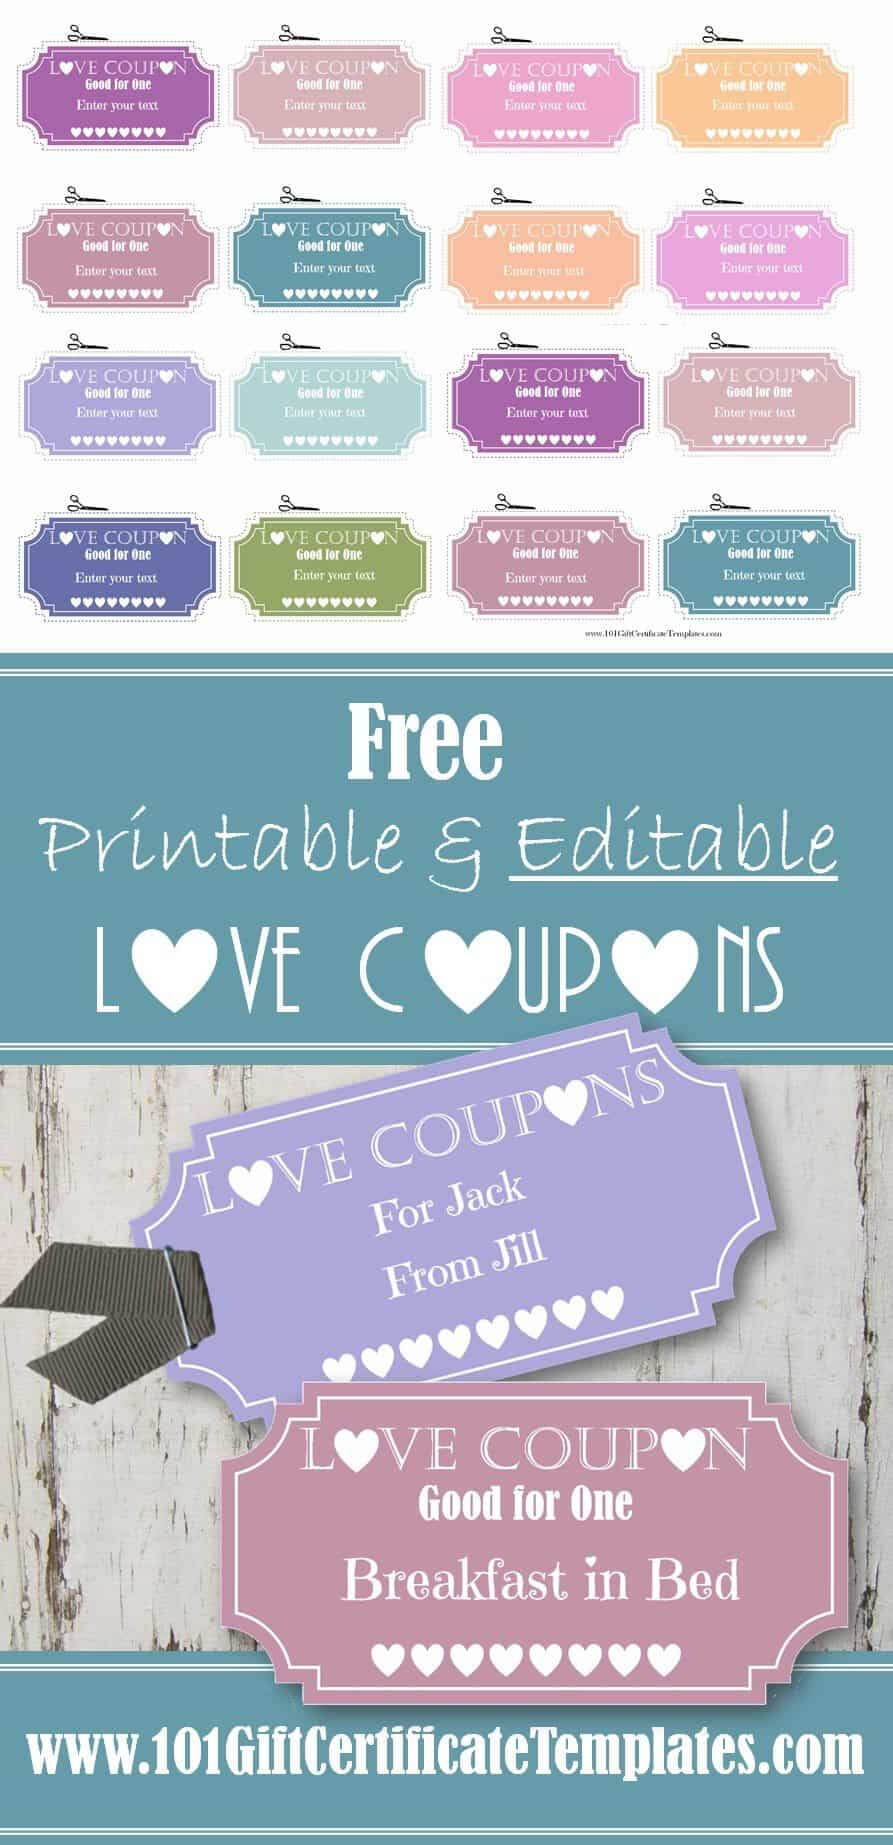 Love Coupons Intended For Love Certificate Templates